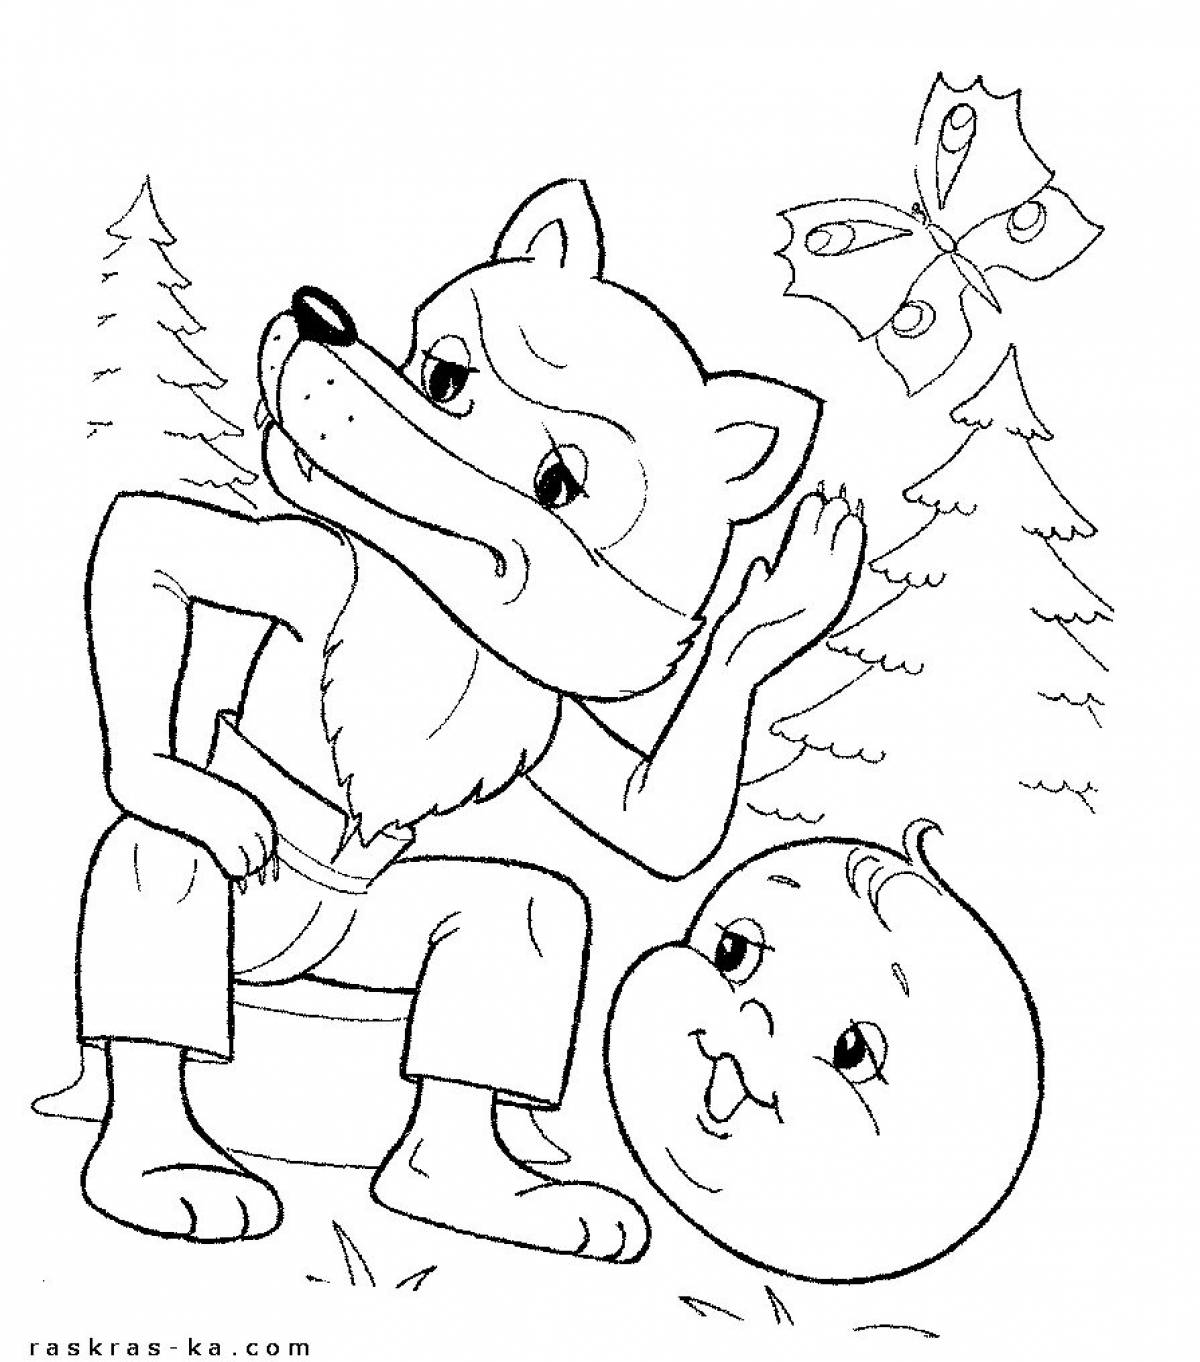 Animated bun and bear coloring page